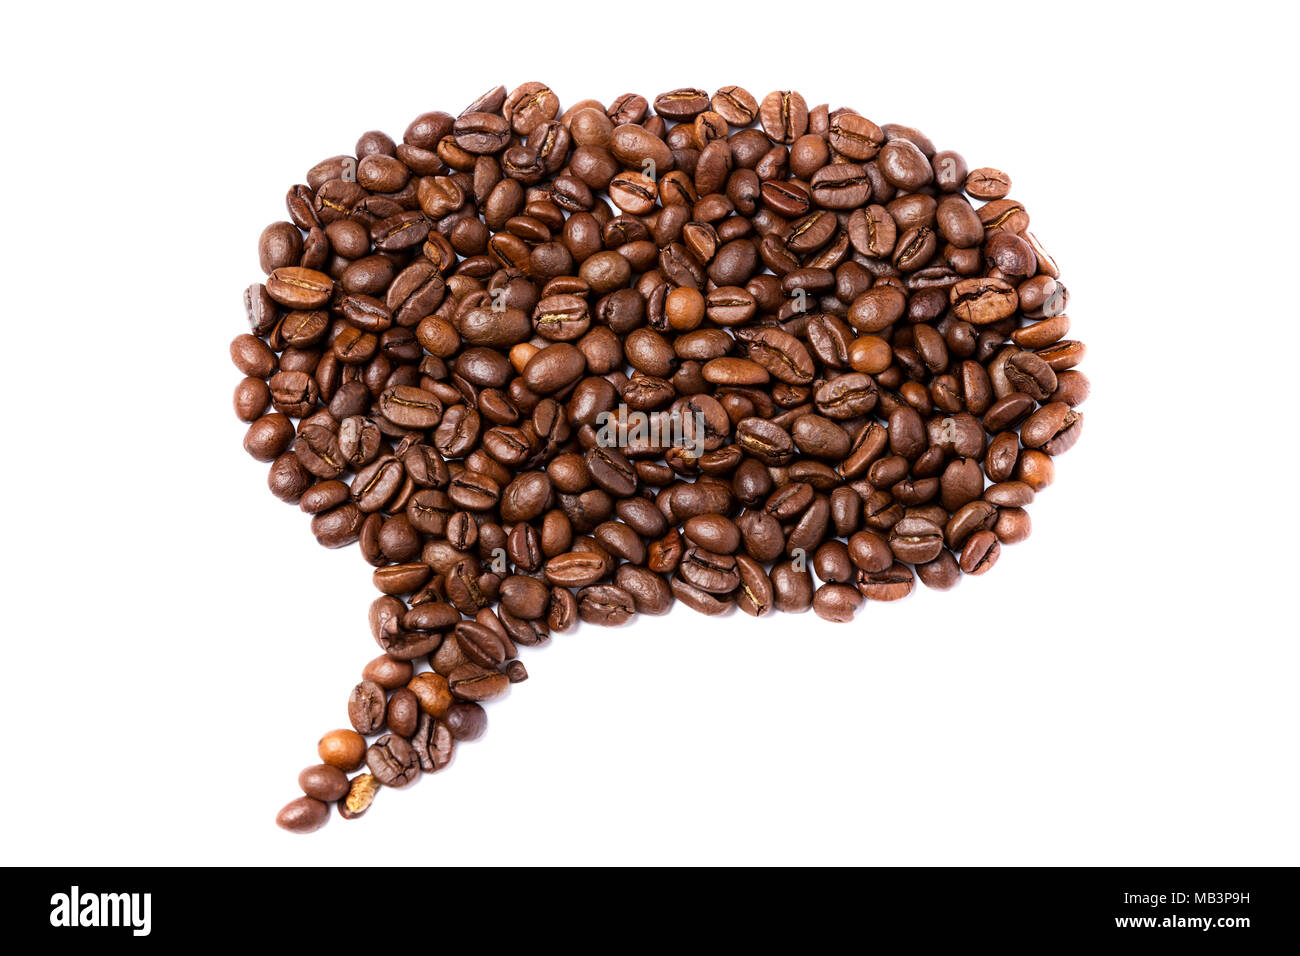 Coffee in shape of speech bubble on white background Stock Photo